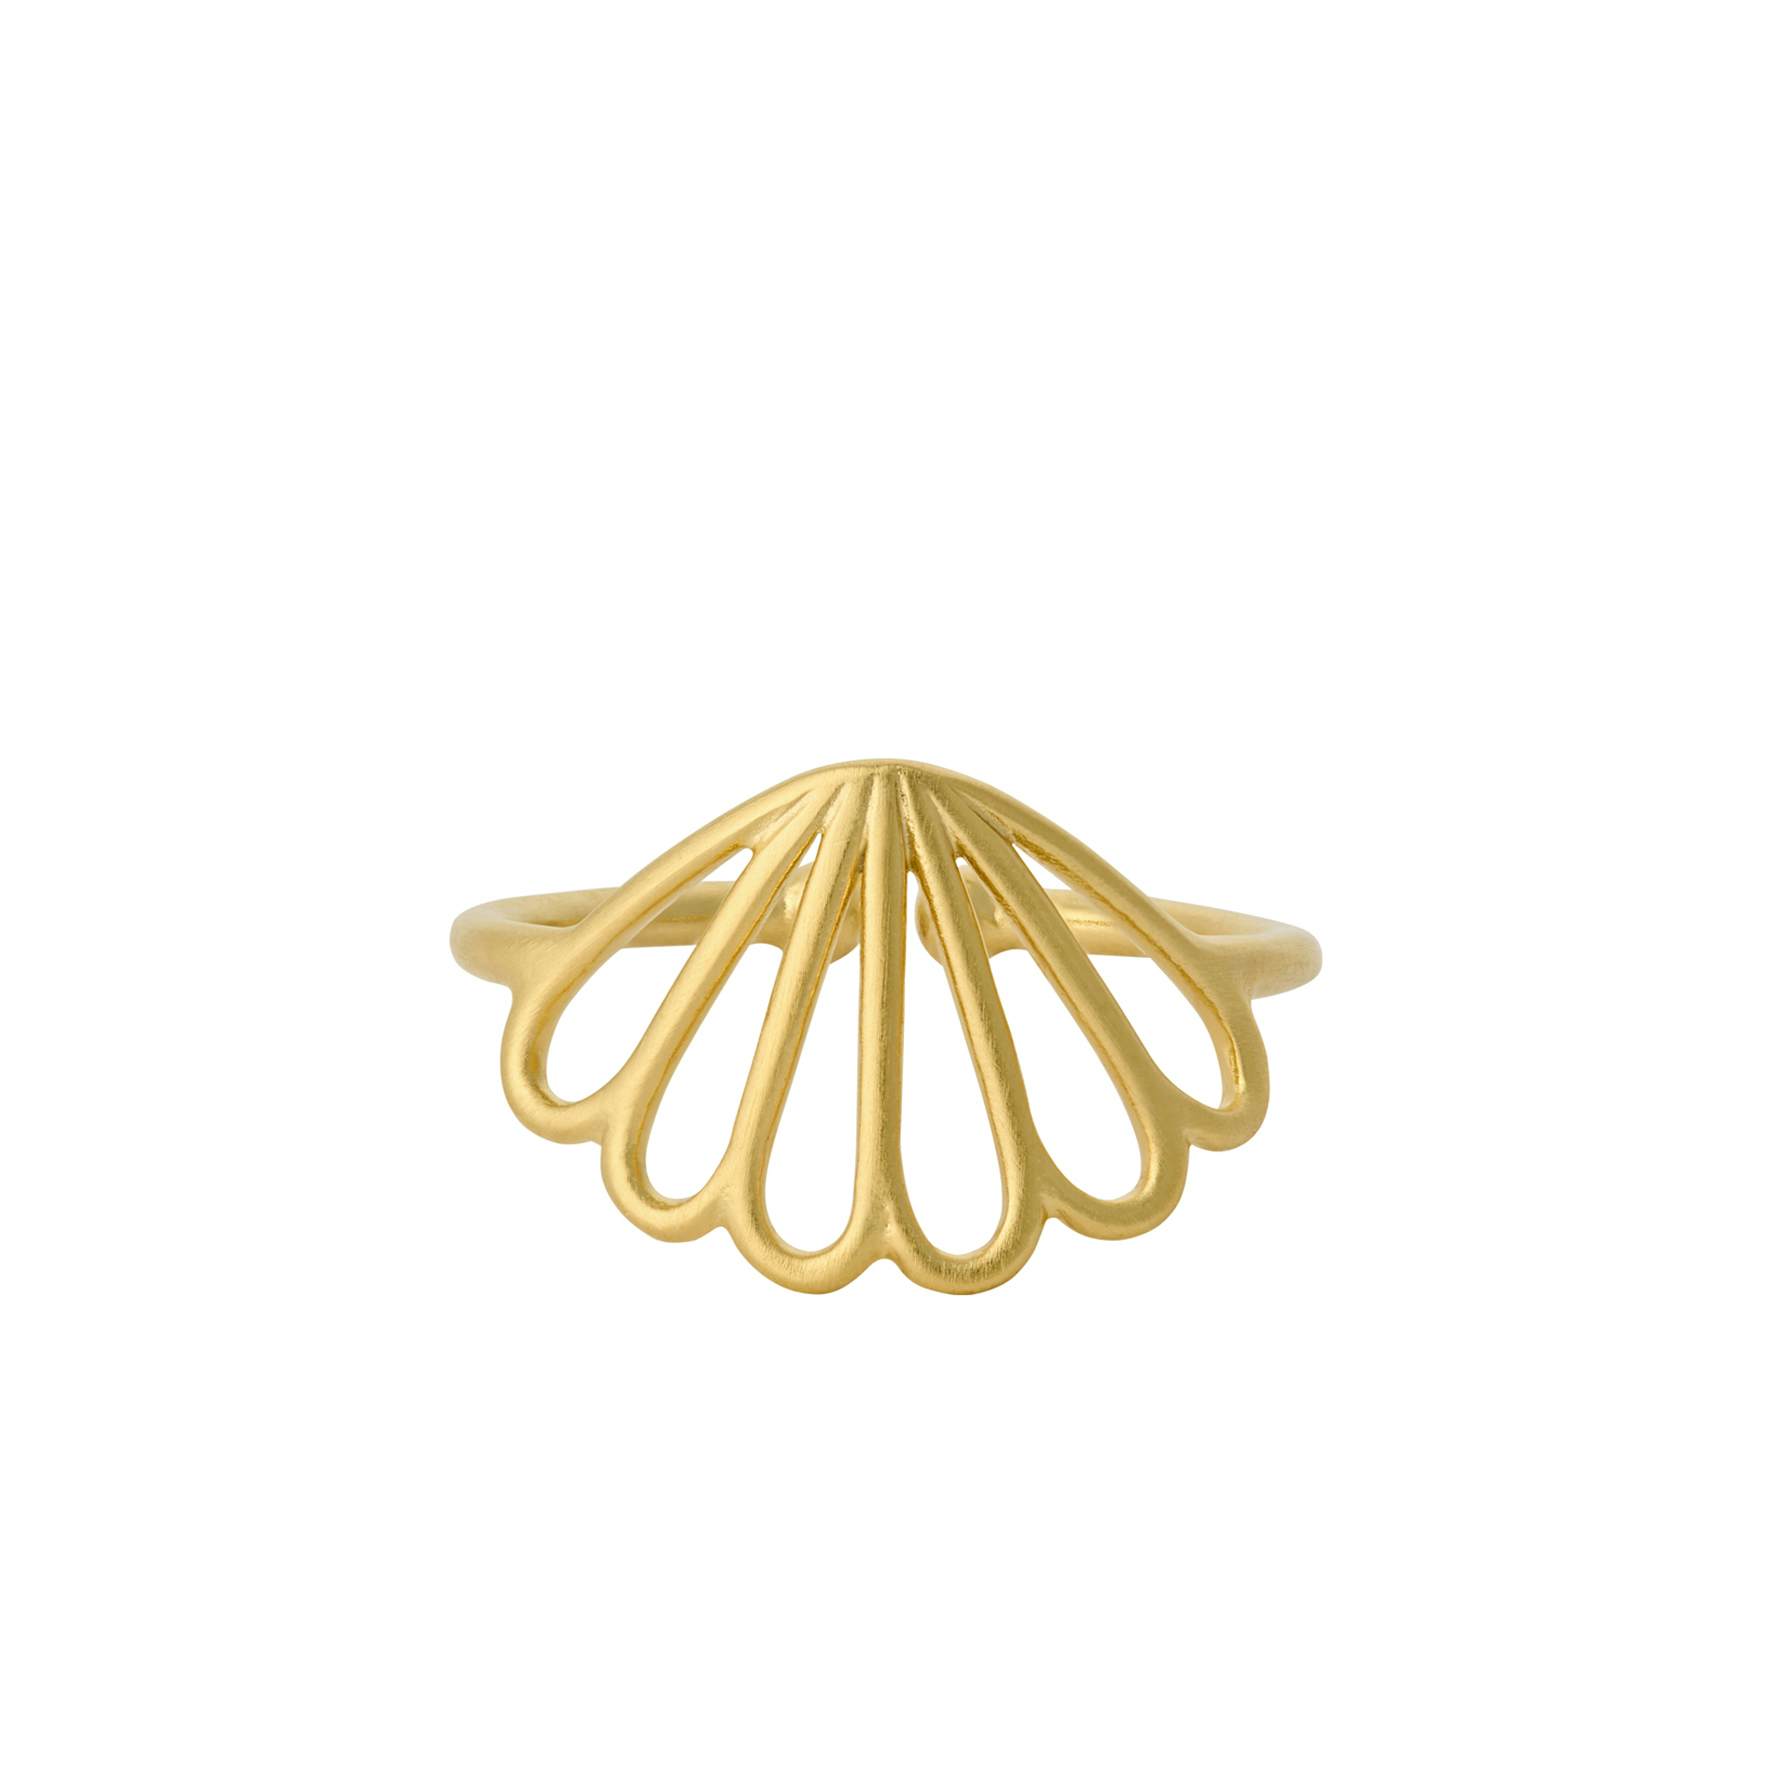 Bellis Ring from Pernille Corydon in Goldplated-Silver Sterling 925